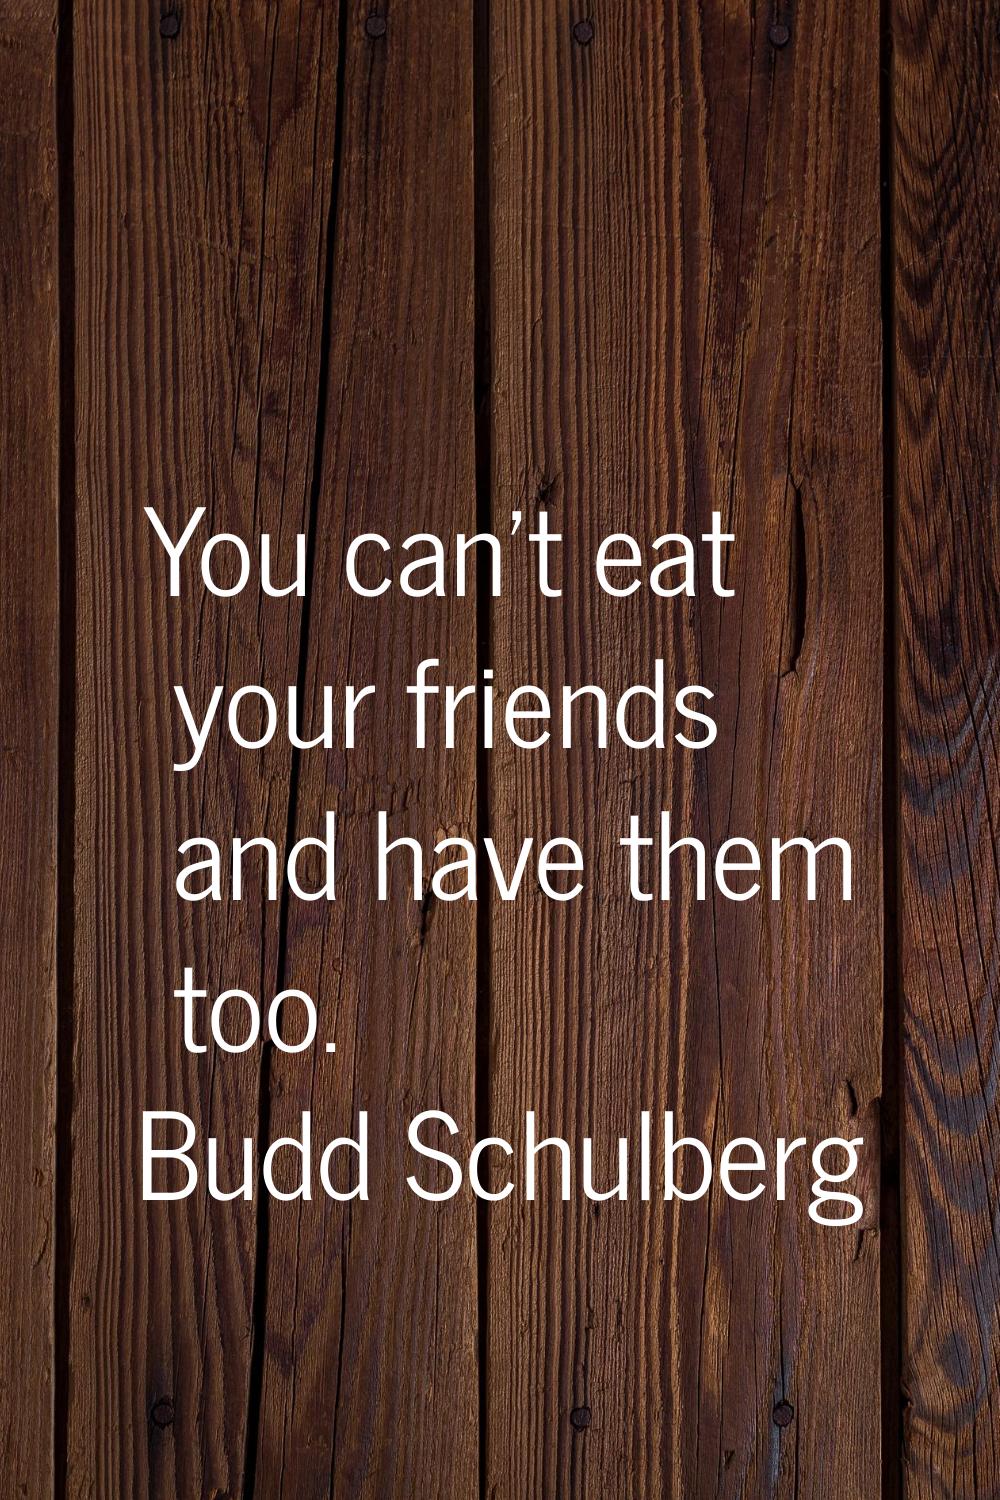 You can't eat your friends and have them too.